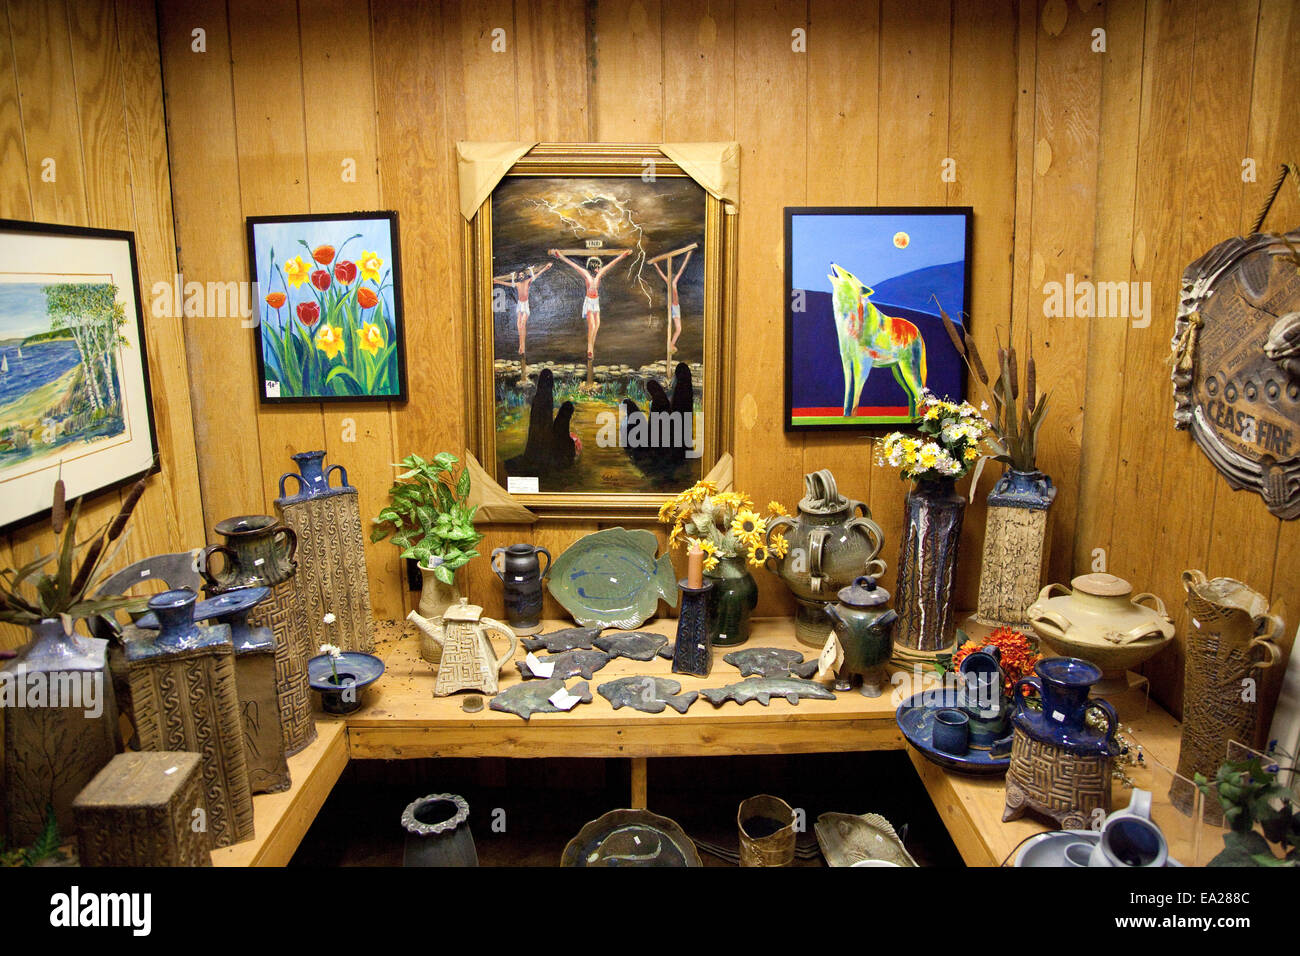 View of the artwork in the Ottertail Oaks Pottery & Wood Shop. Ottertail Minnesota MN USA Stock Photo